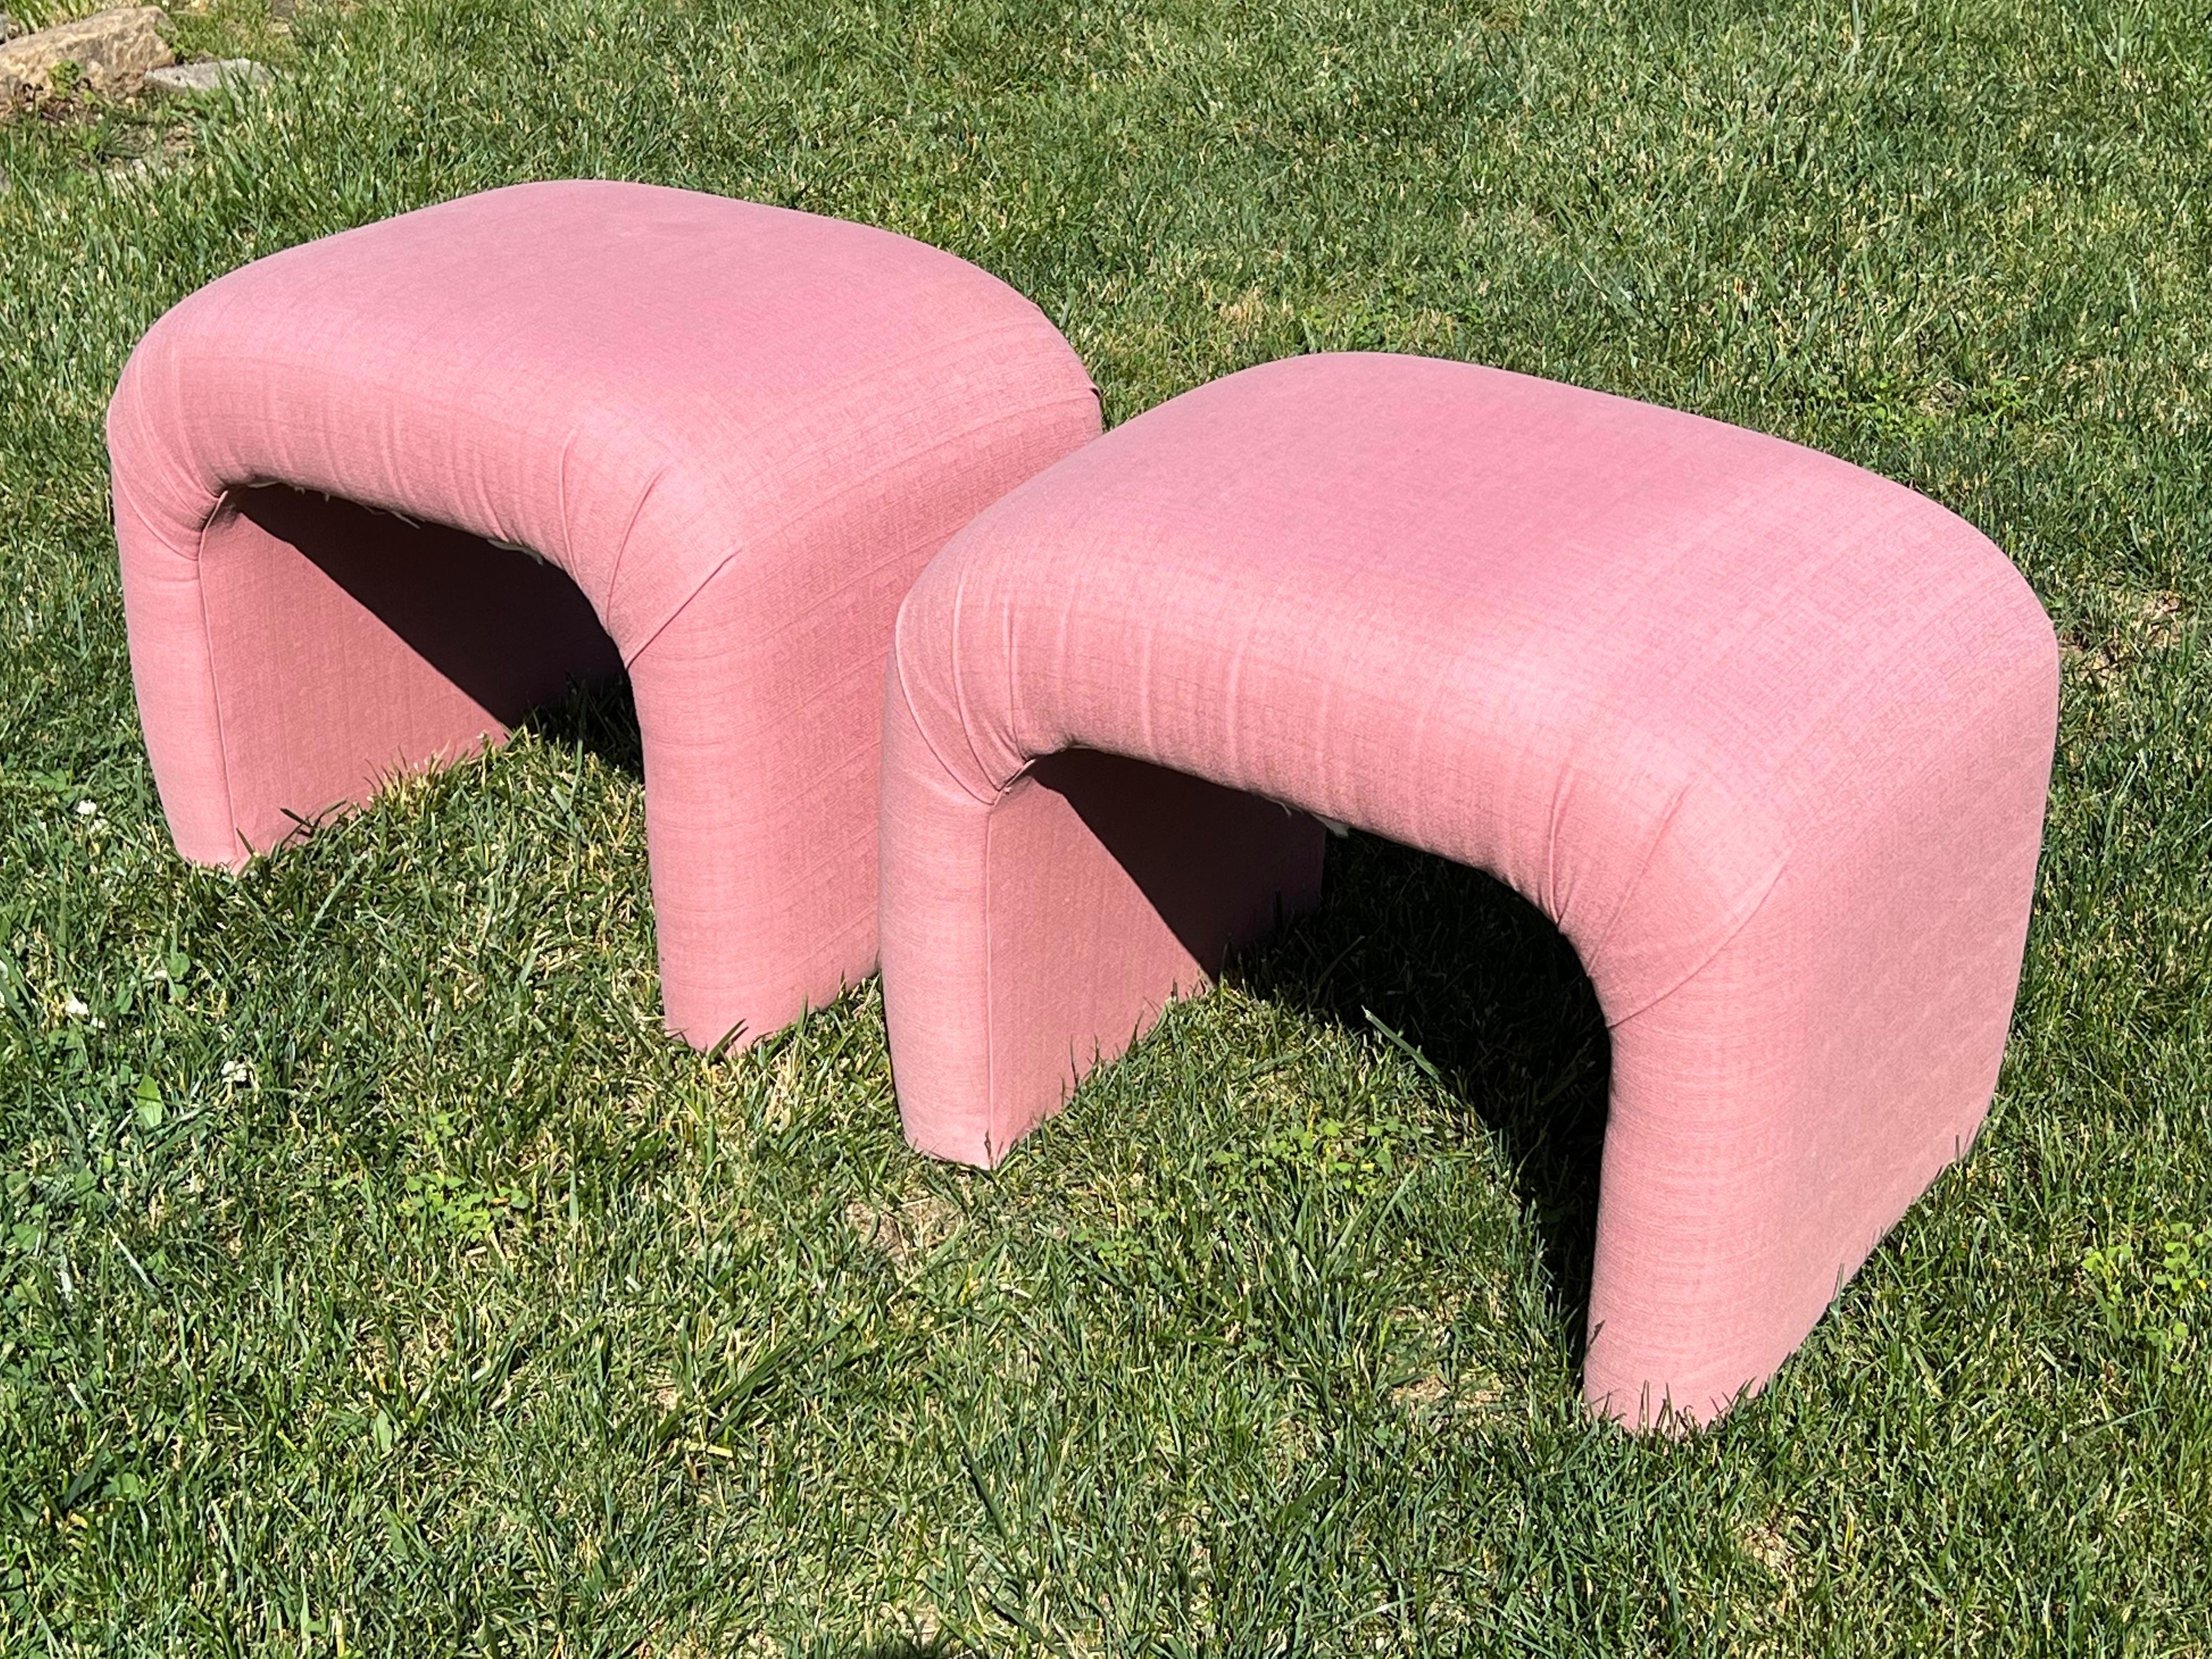 Beautiful mauve pink waterfall stools benches, sell as a pair. They come from an iconic 80s custom contemporary home with lots of pink and pastel color furniture, based in upstate New York.

This pair of stools is in original fabric, which shows